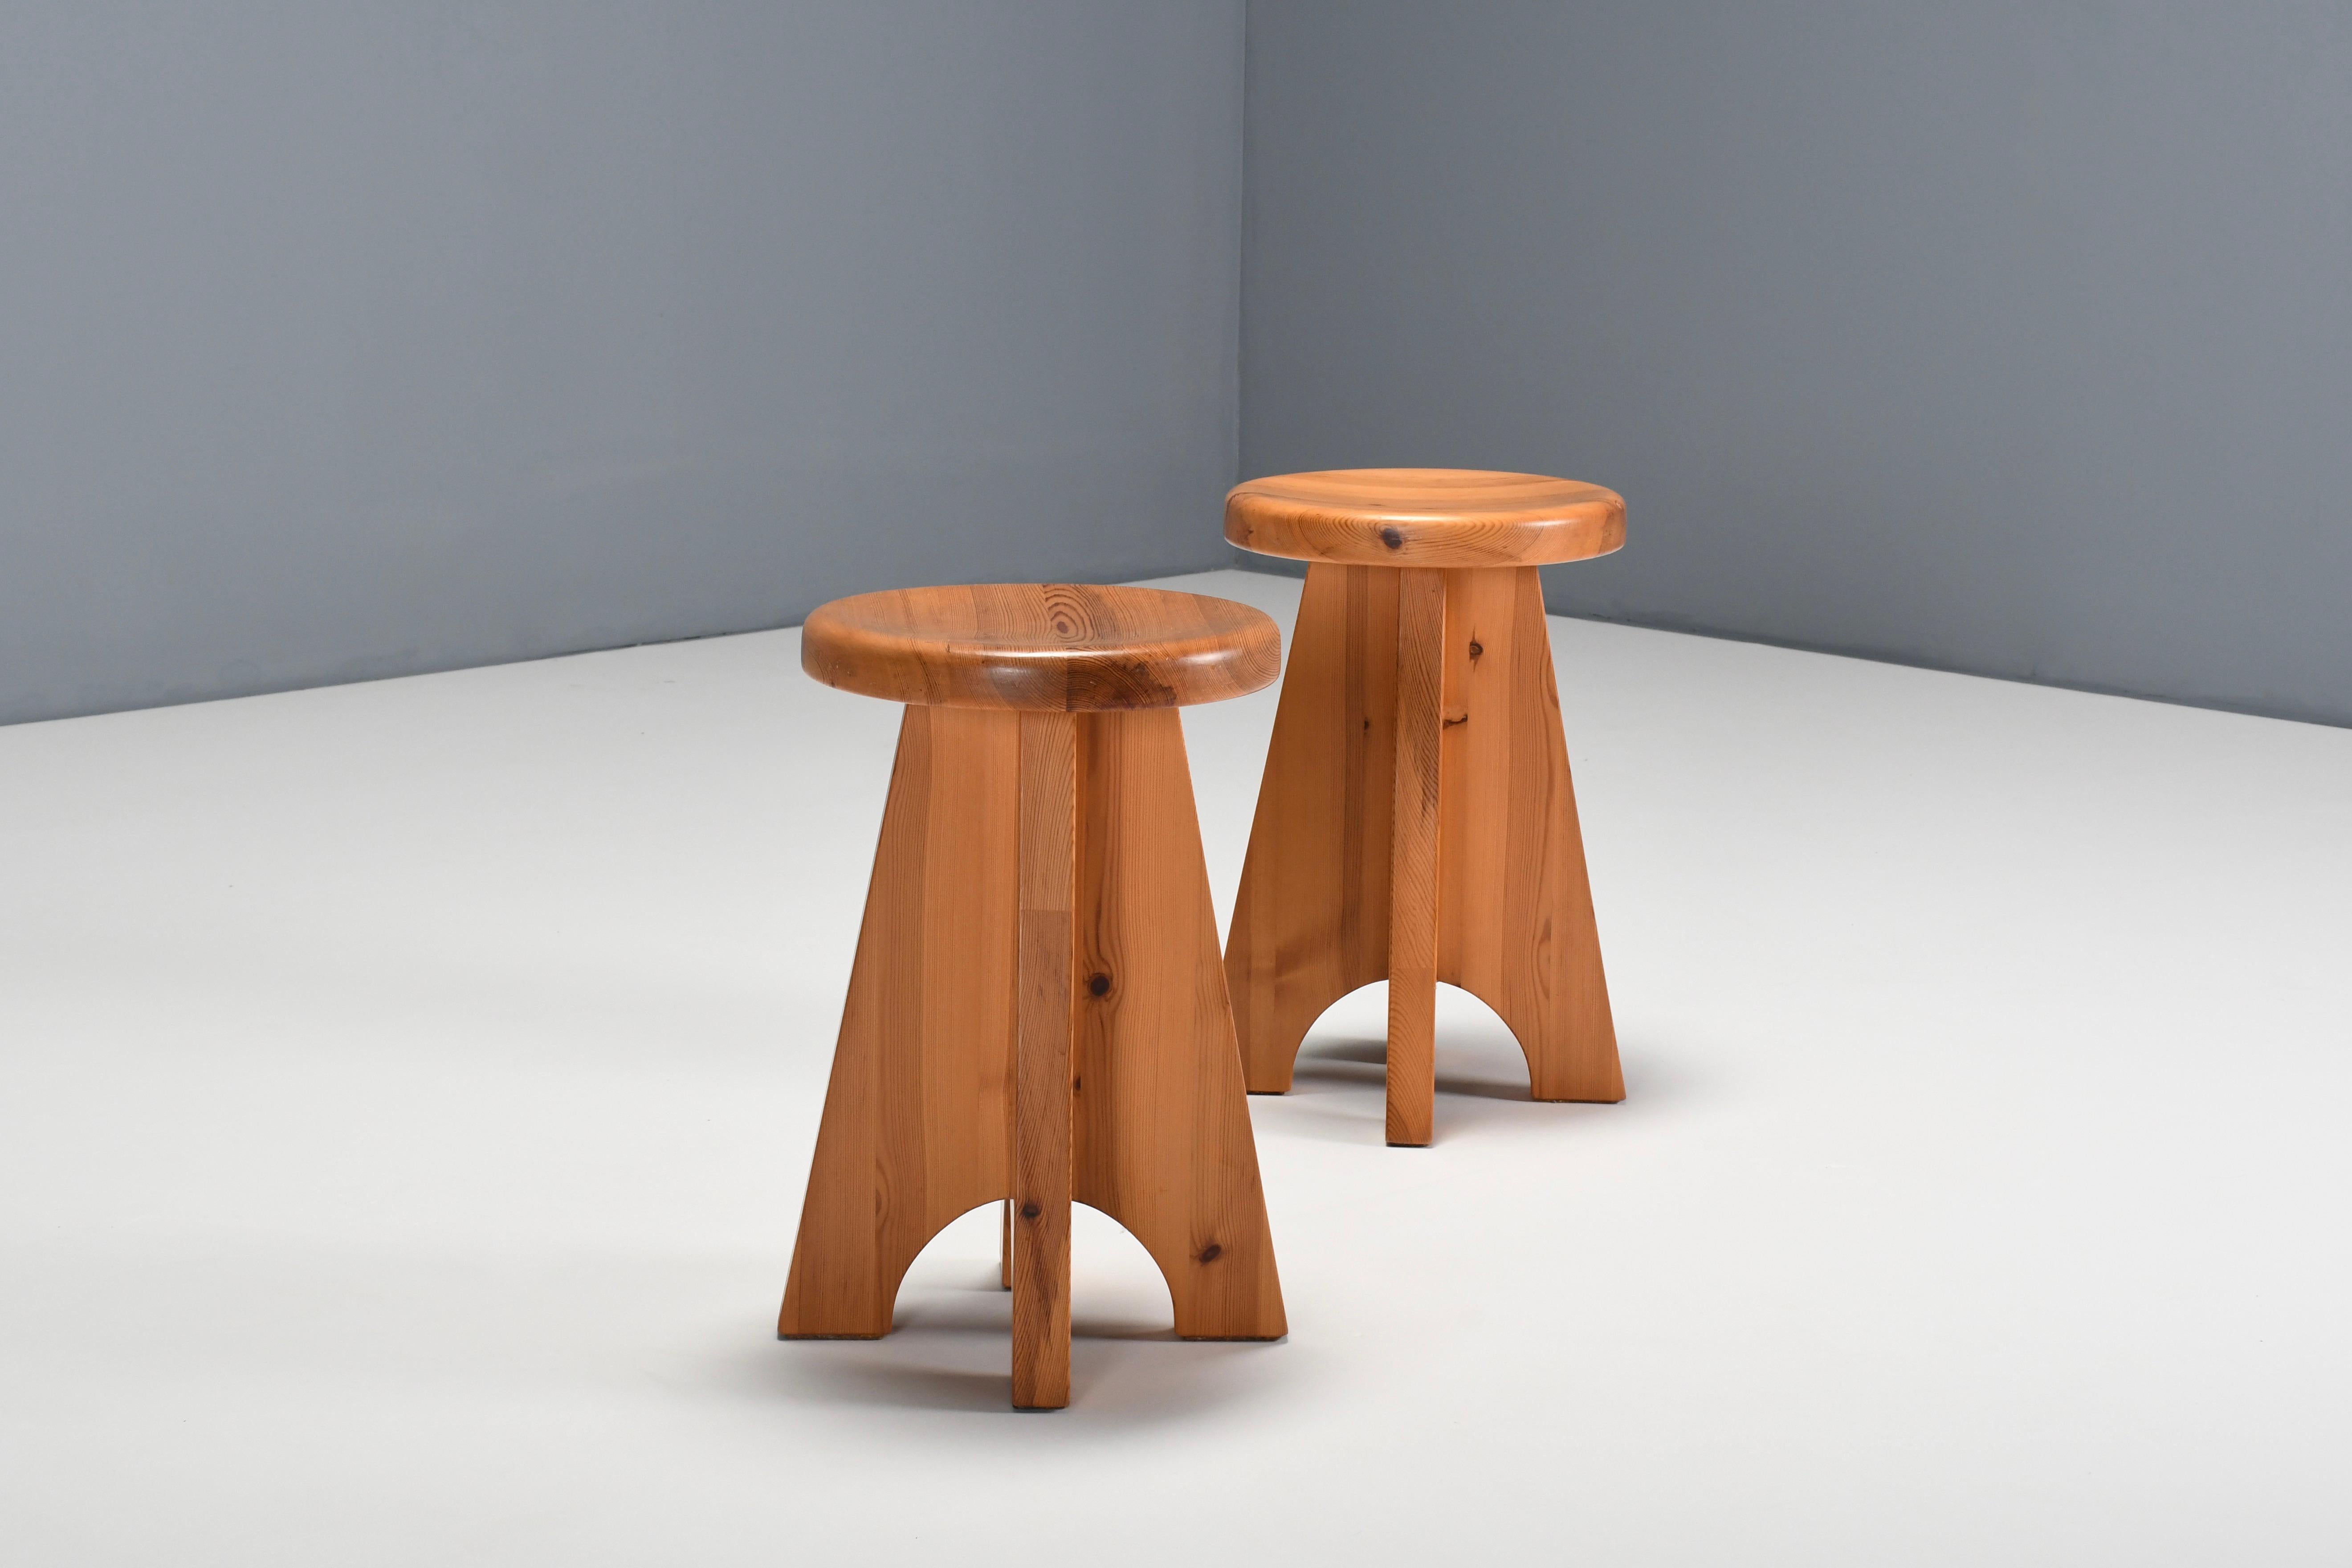 Set of solid pine stools in very good condition. 

Made in Sweden in the 1960s. 

The round seat is made of solid pine. 

The base is also made of solid pine wood and has four 'legs'

The rustic pine wood boasts a rich and warm patina. 

The style